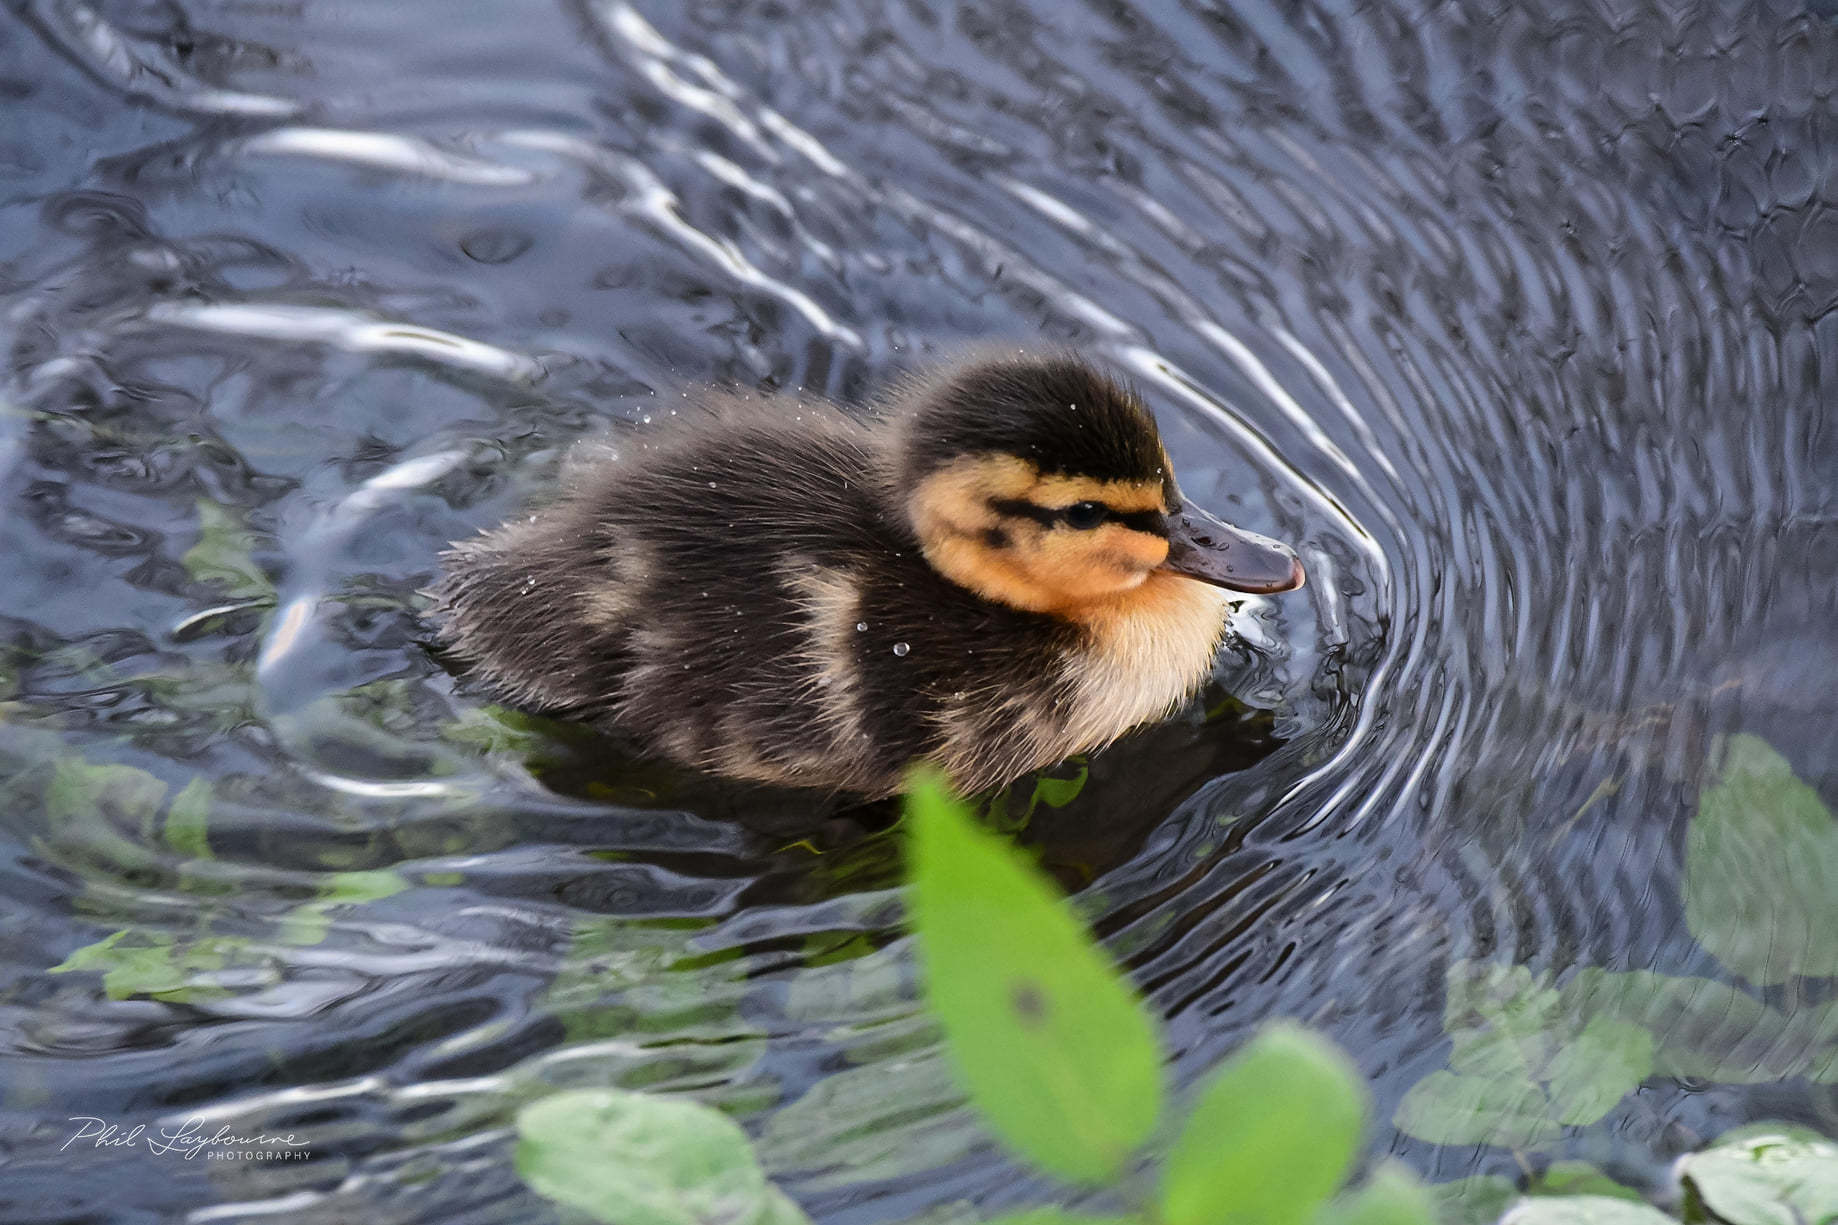 A diddy duckling (Phil Laybourne)